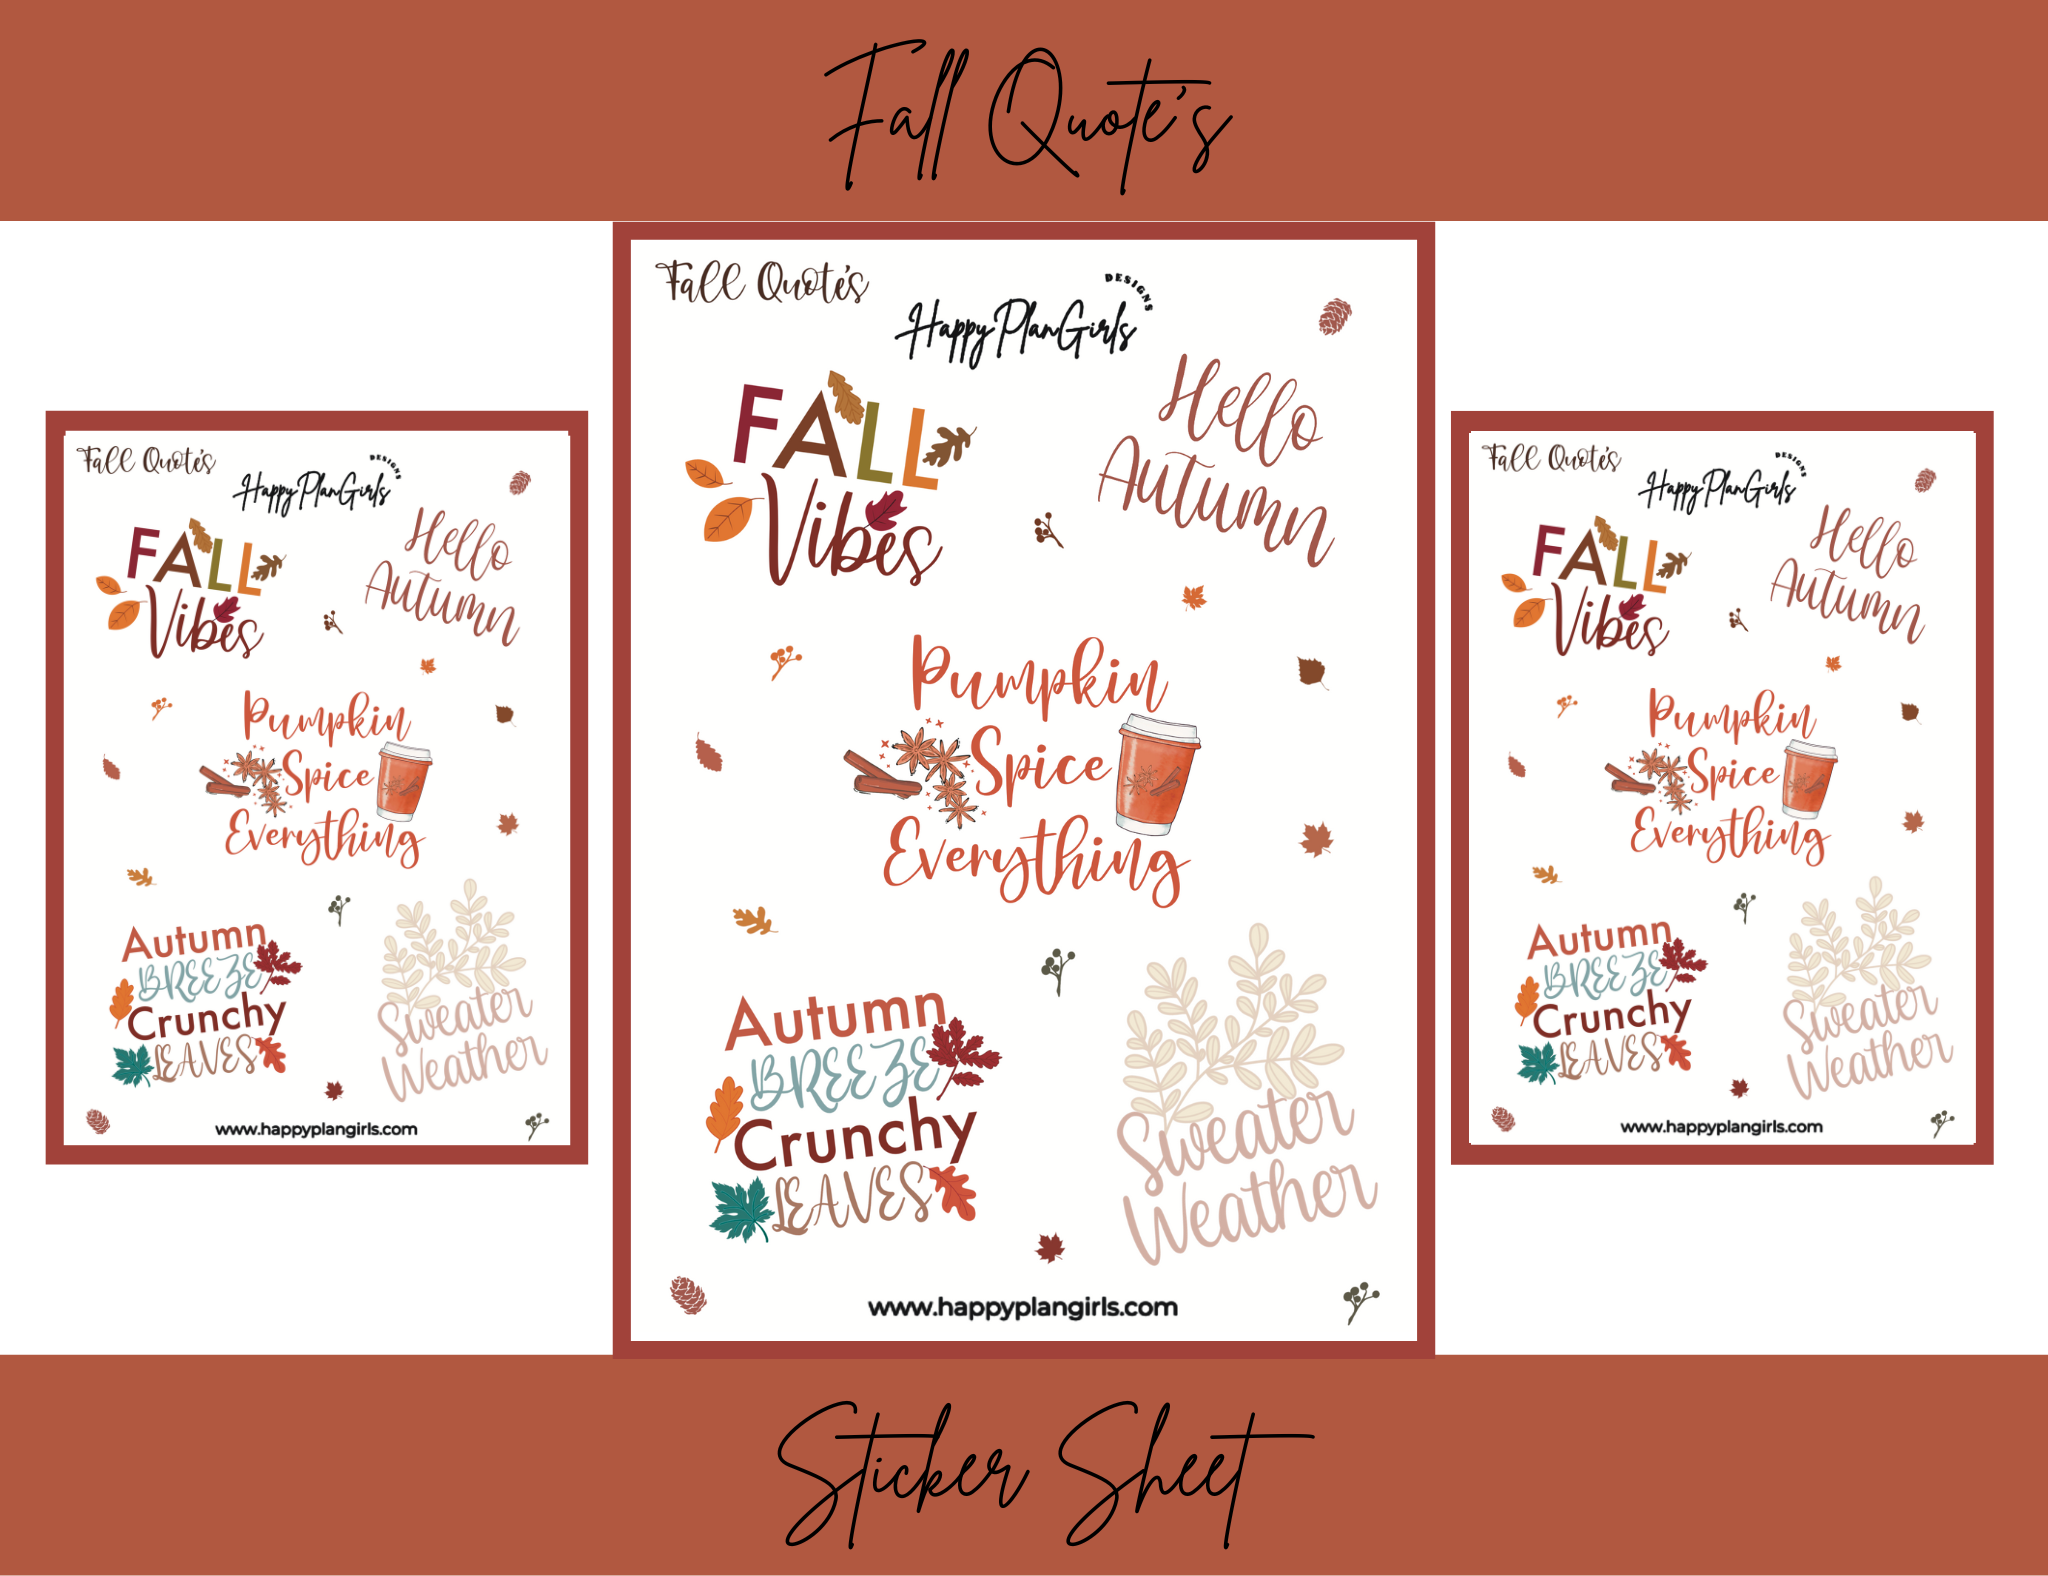 Fall Quote's Sticker Sheet